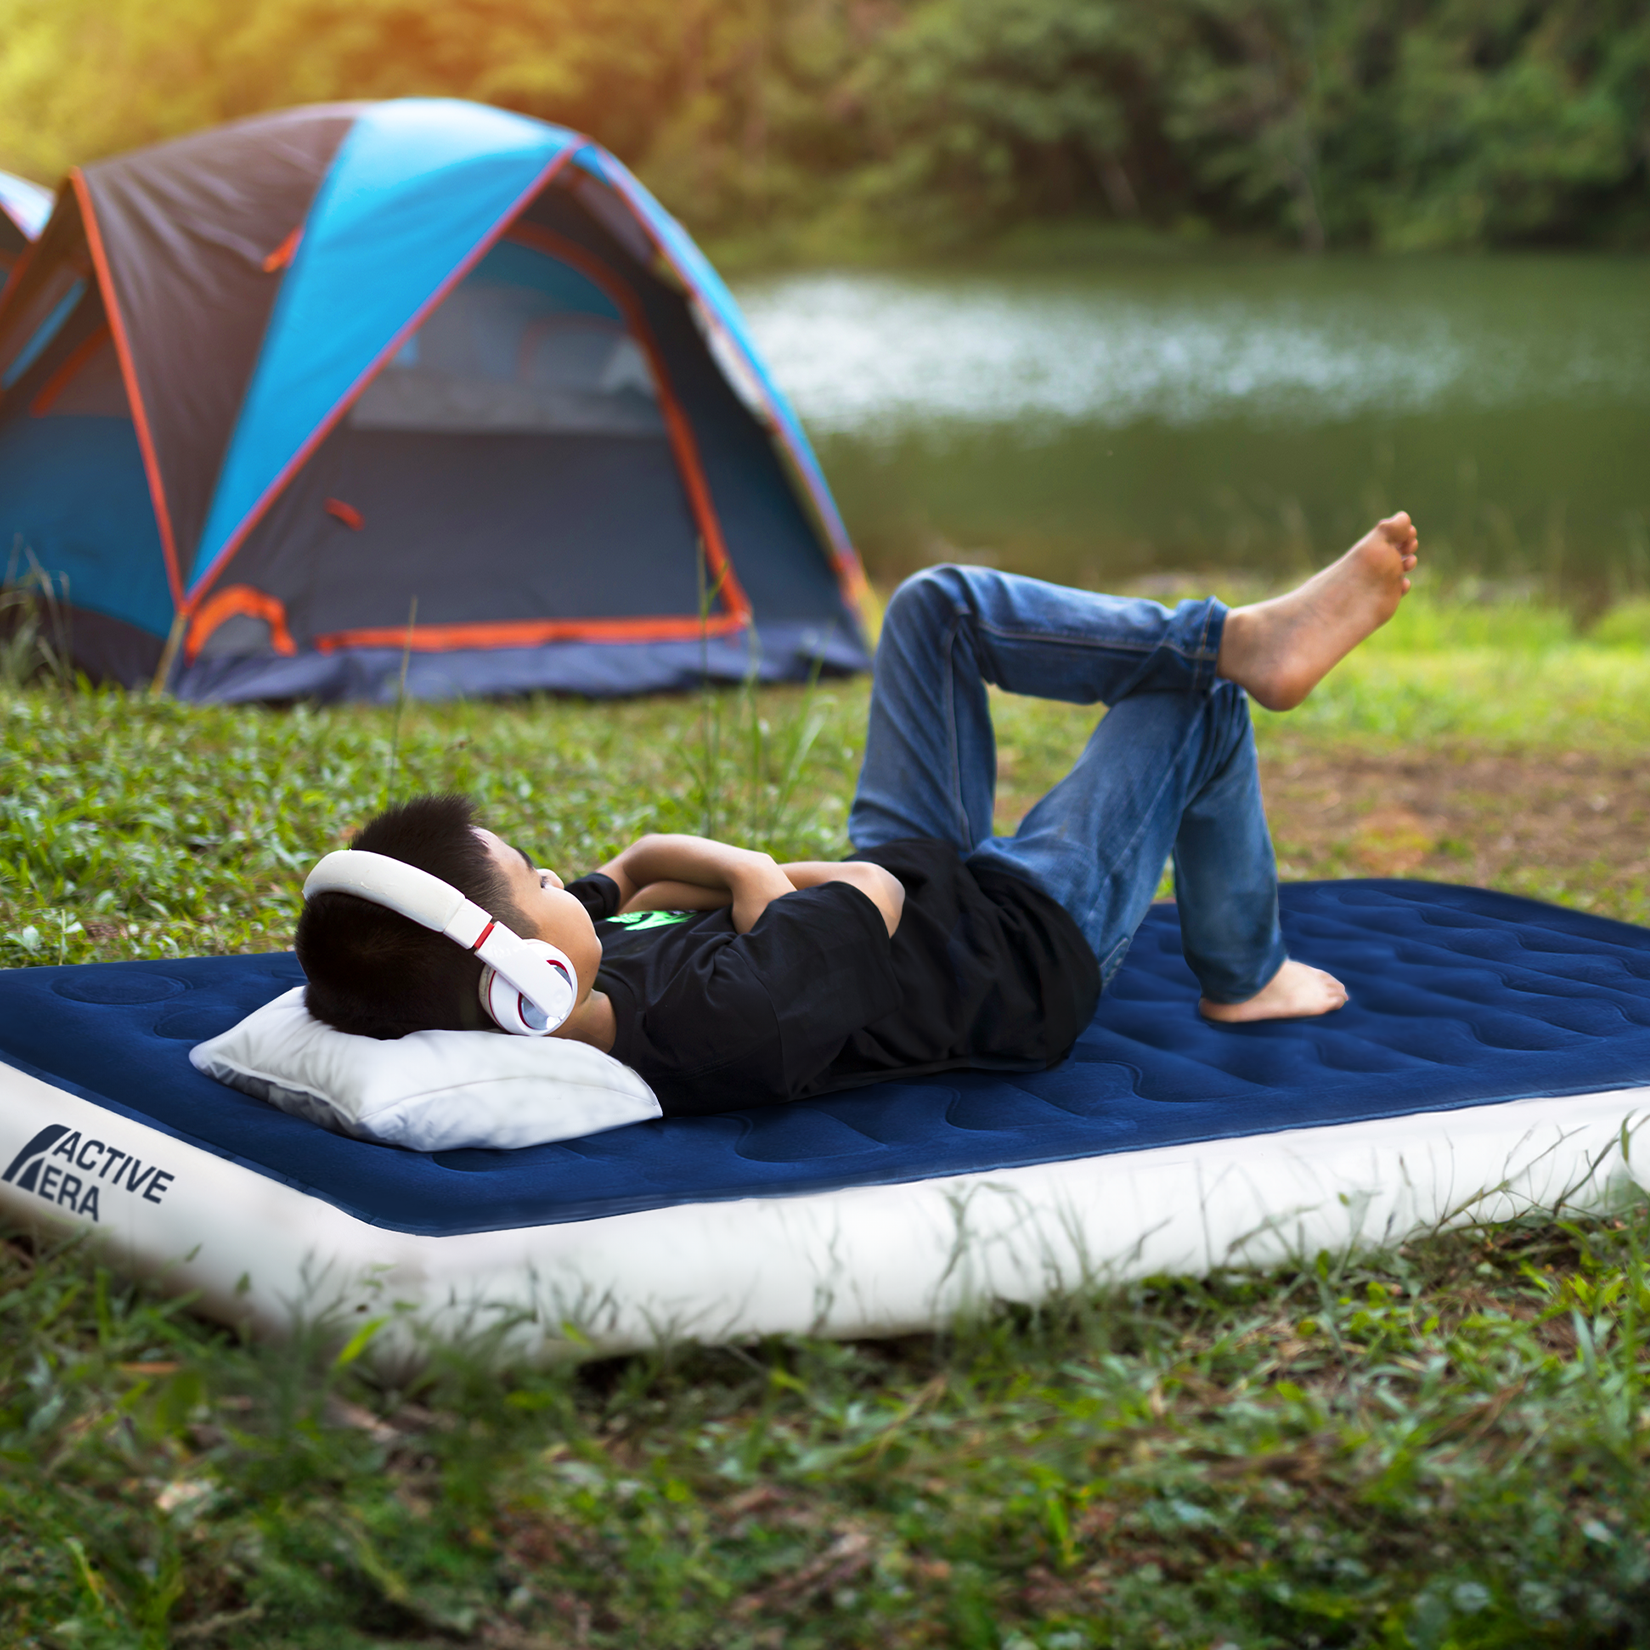 Single Camping Air Bed – Navy/White